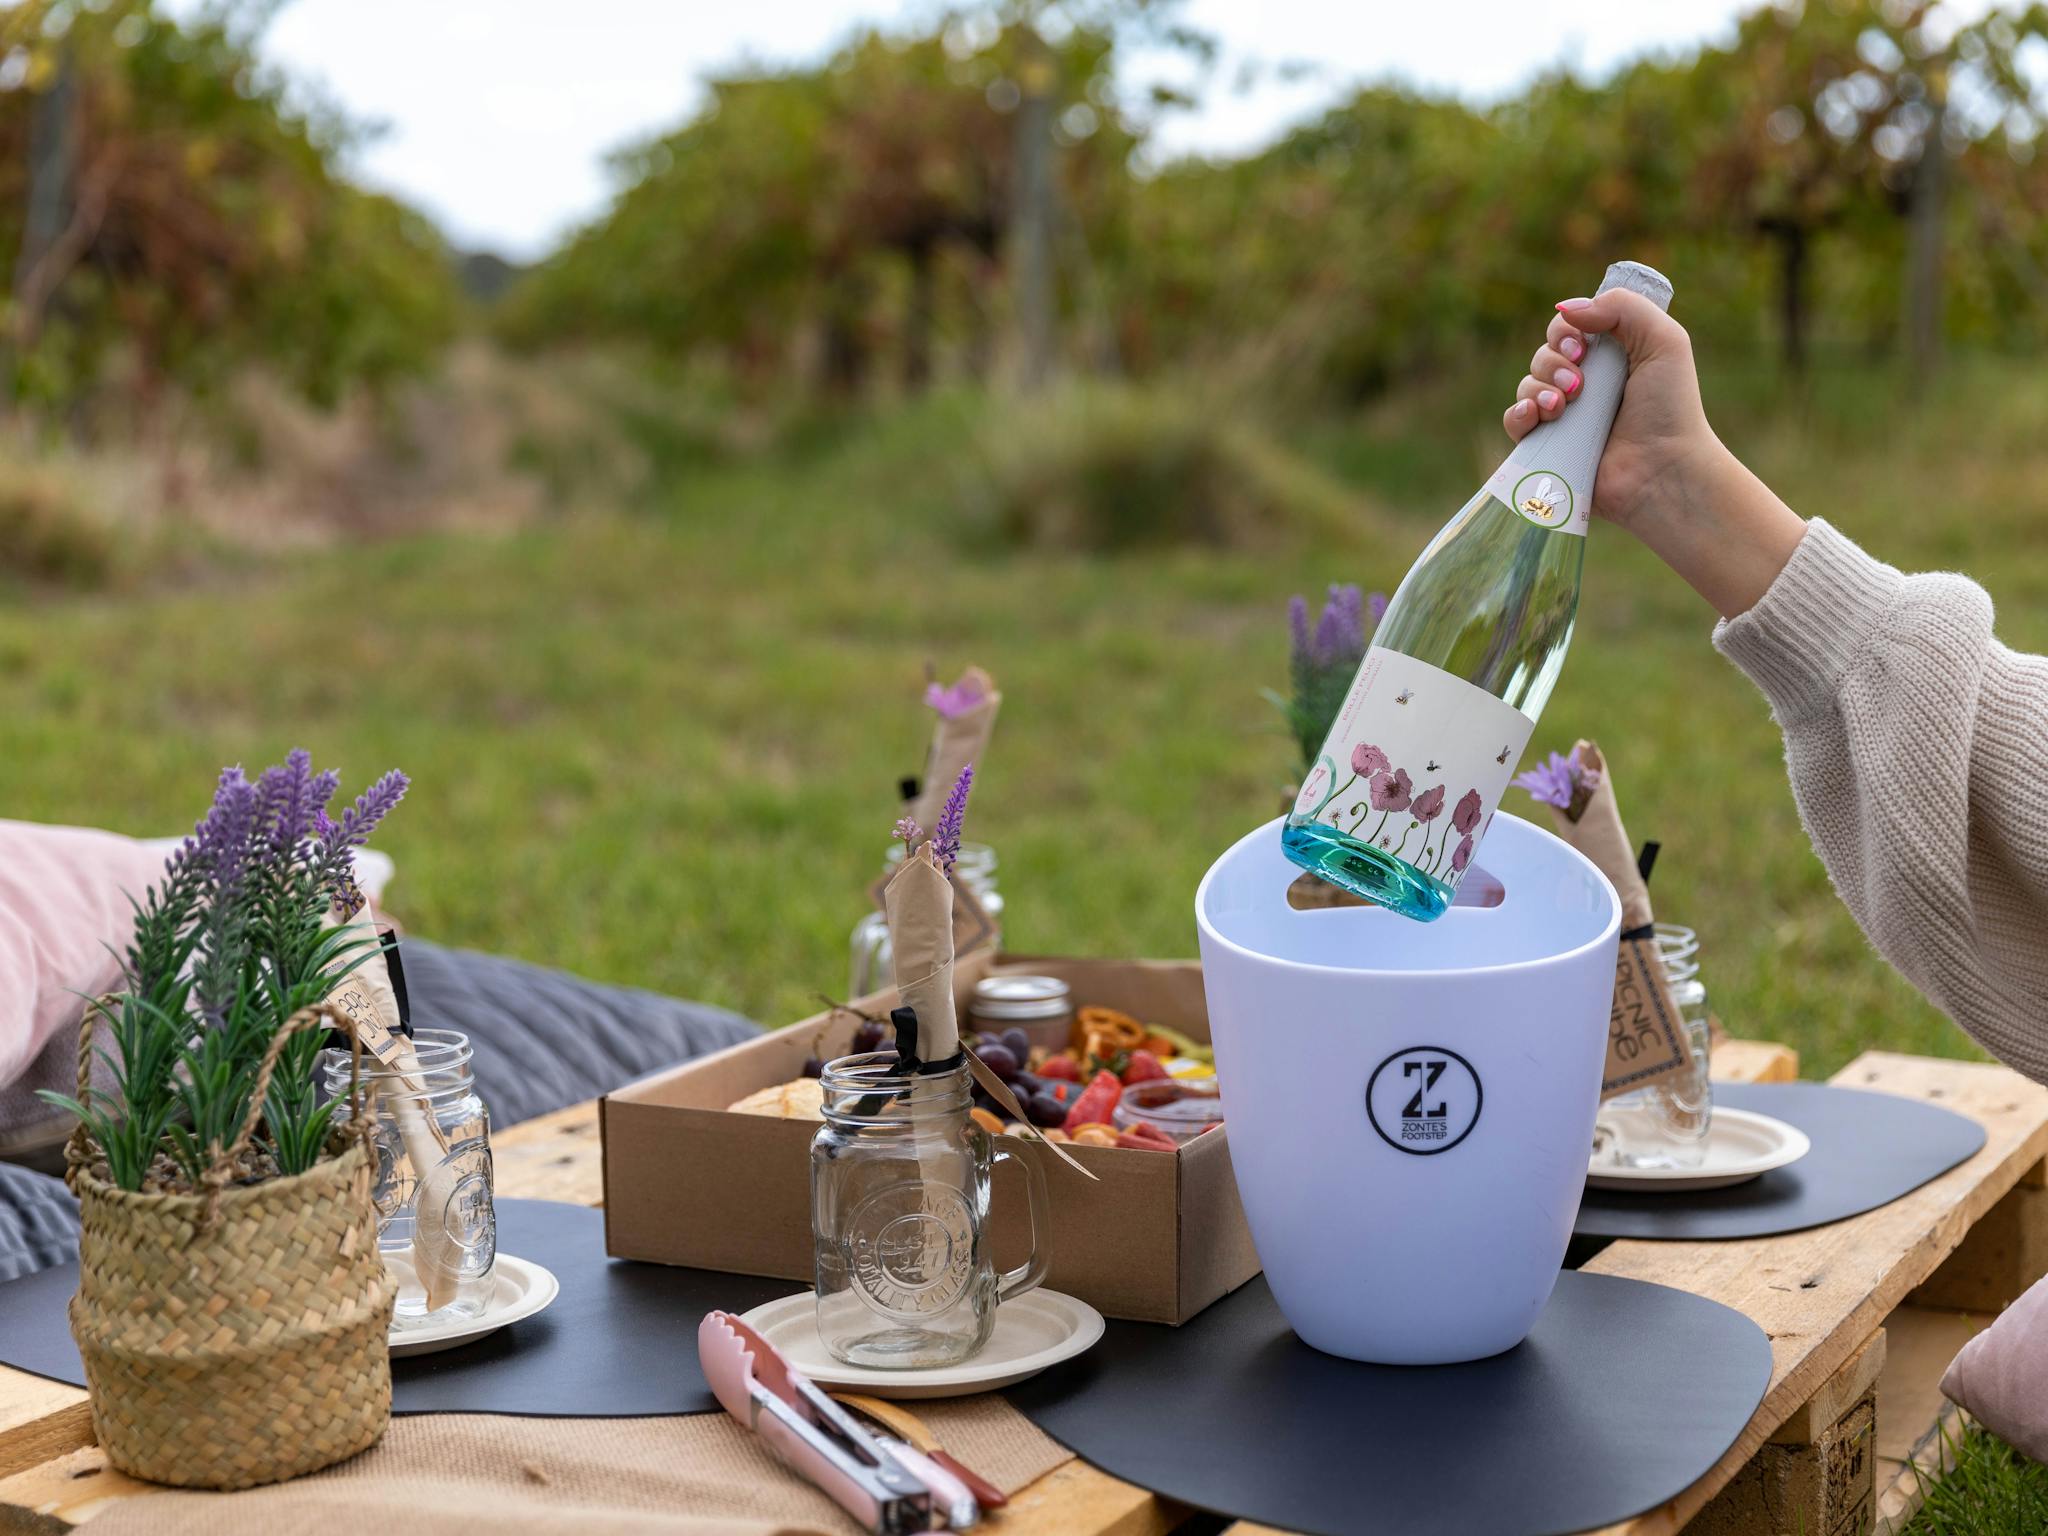 Picnic table with woman taking Prosecco bottle out of white ice bucket with Zontes circle logo on it